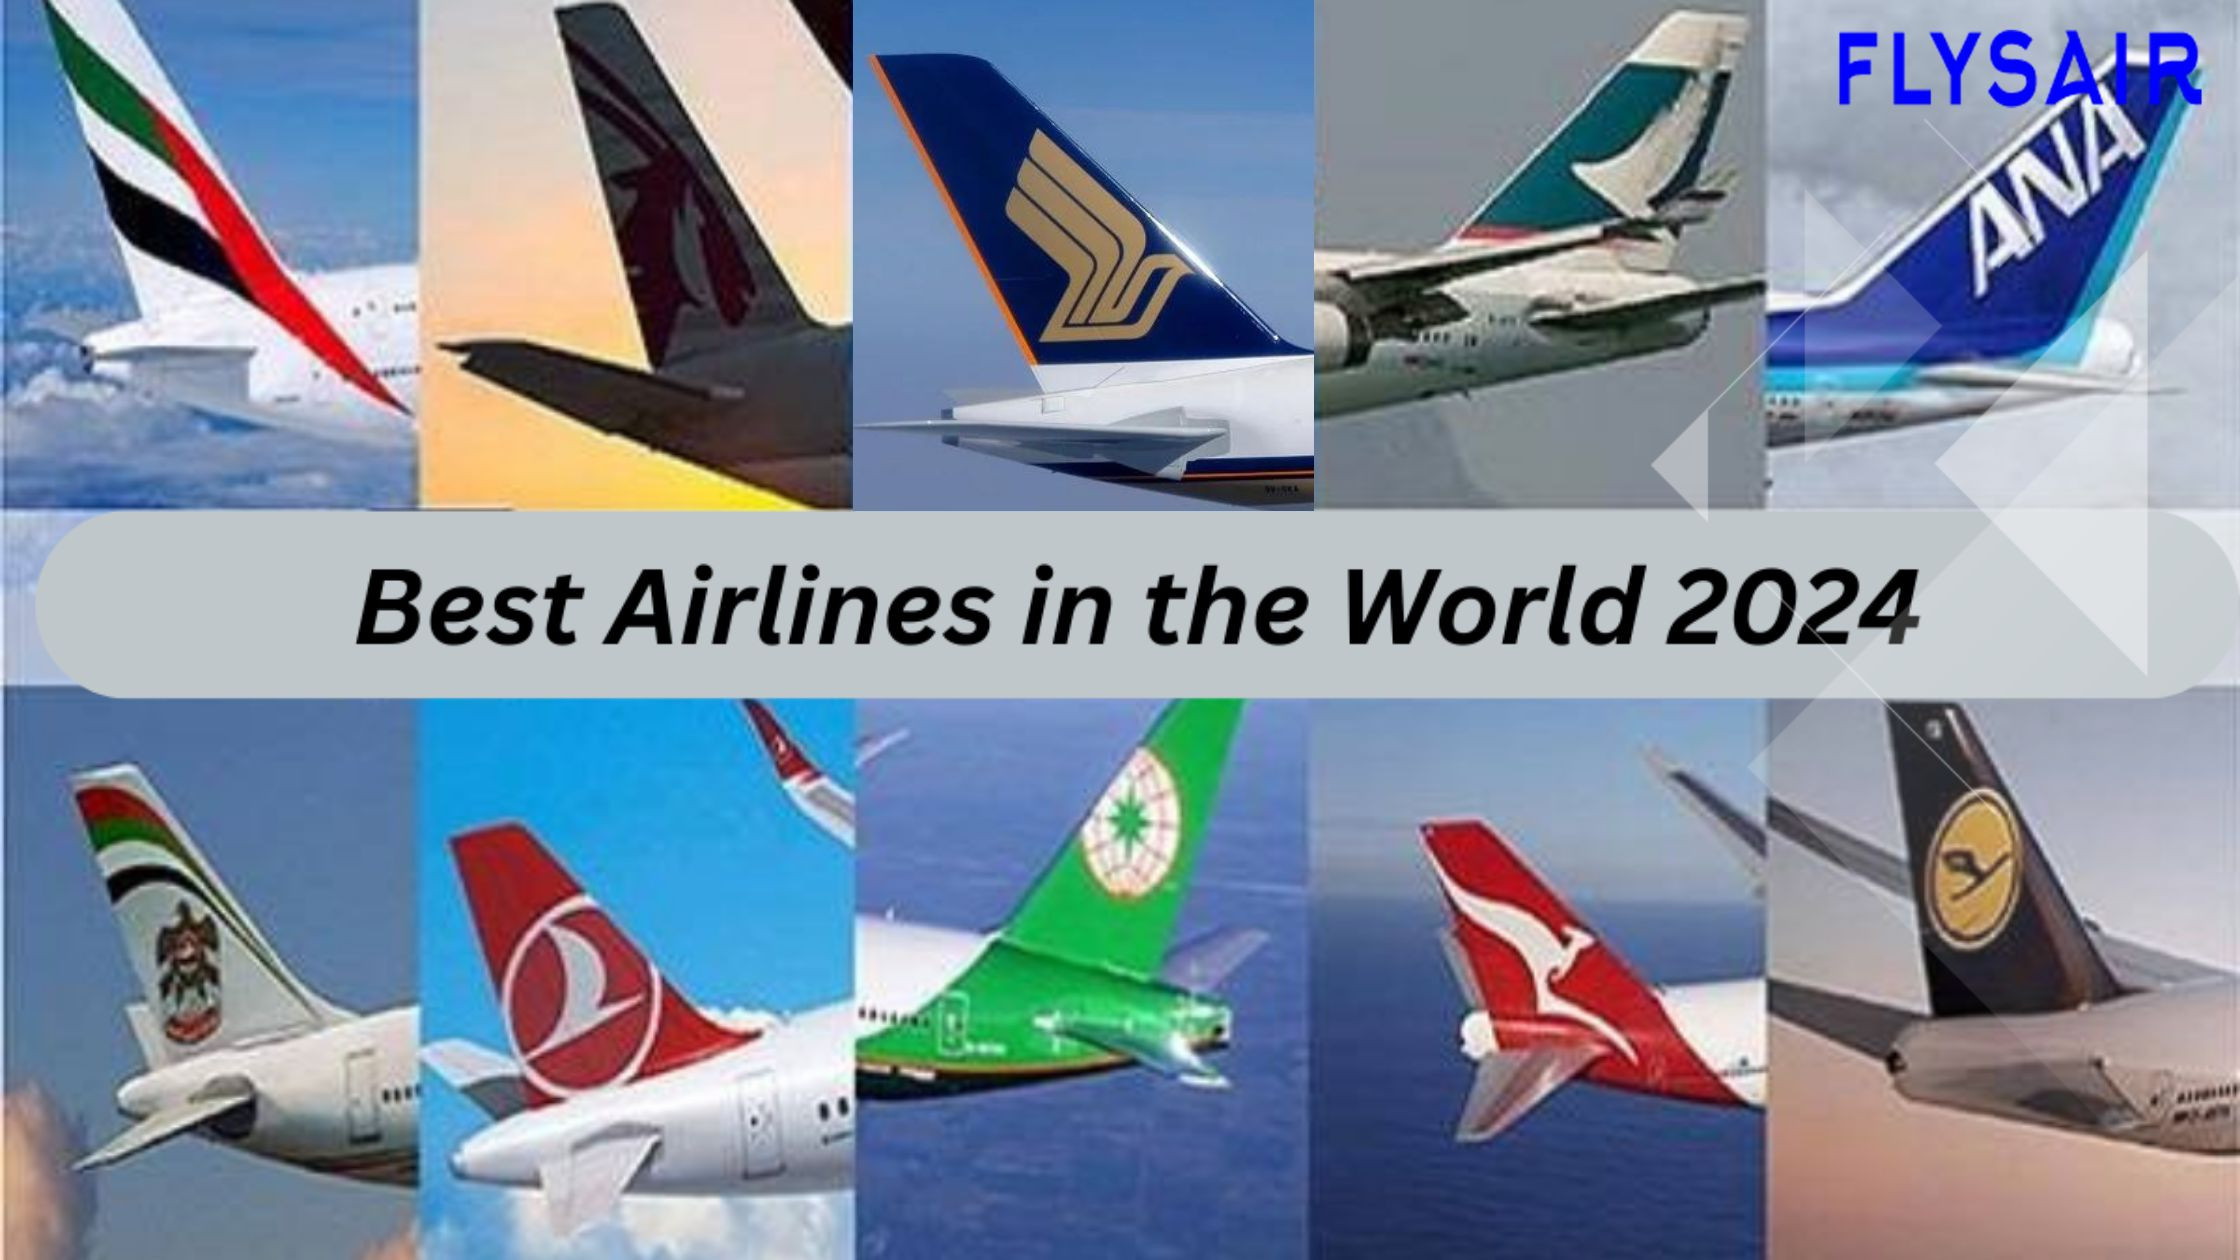 Top 10 Airlines for Customer Service in 2024